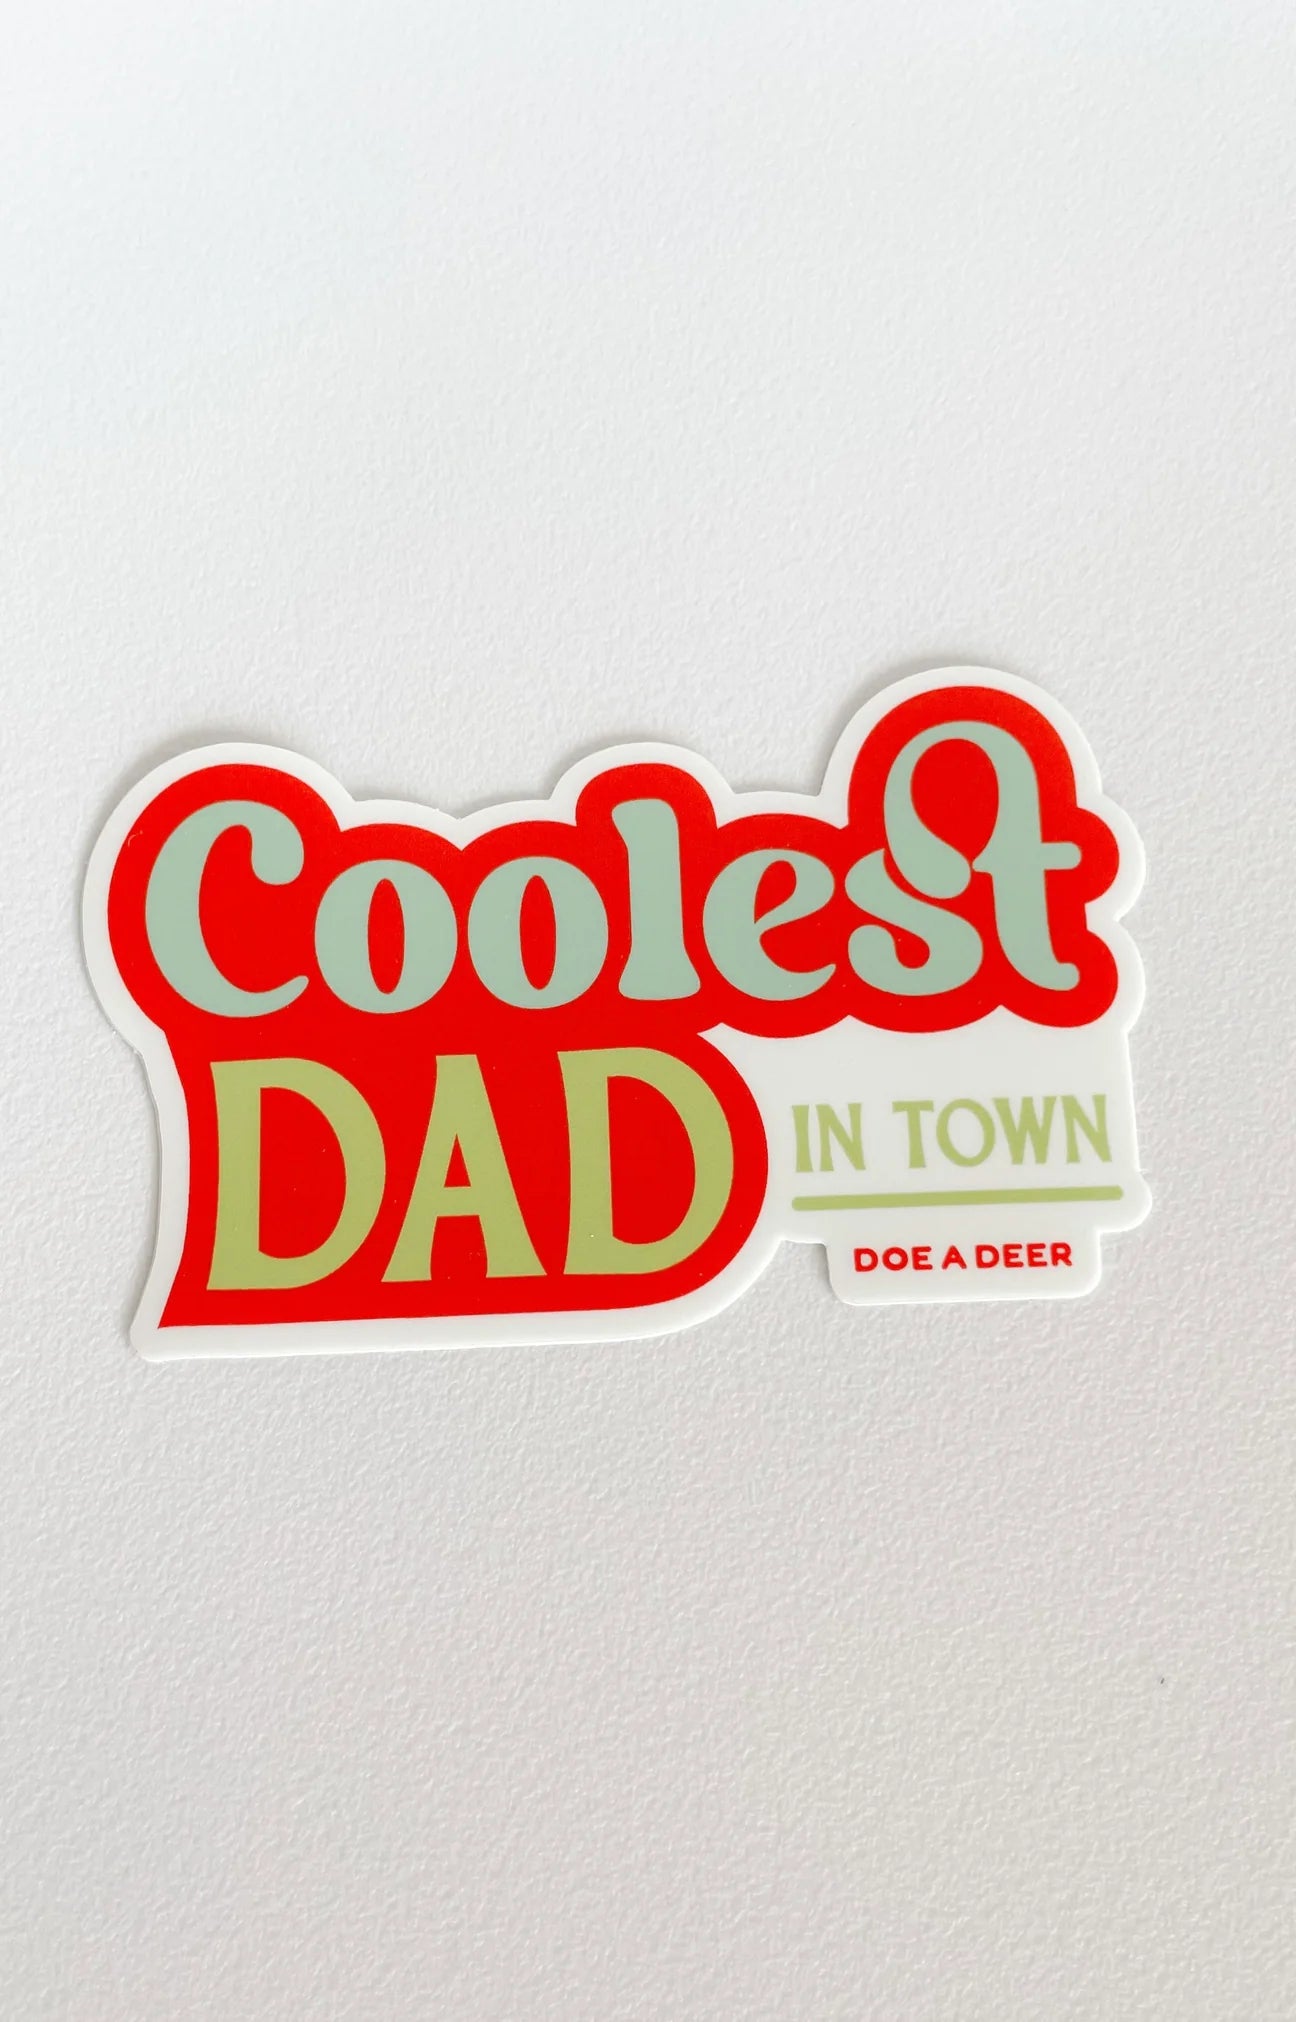 Coolest Dad in Town Sticker from Doe A Deer Design